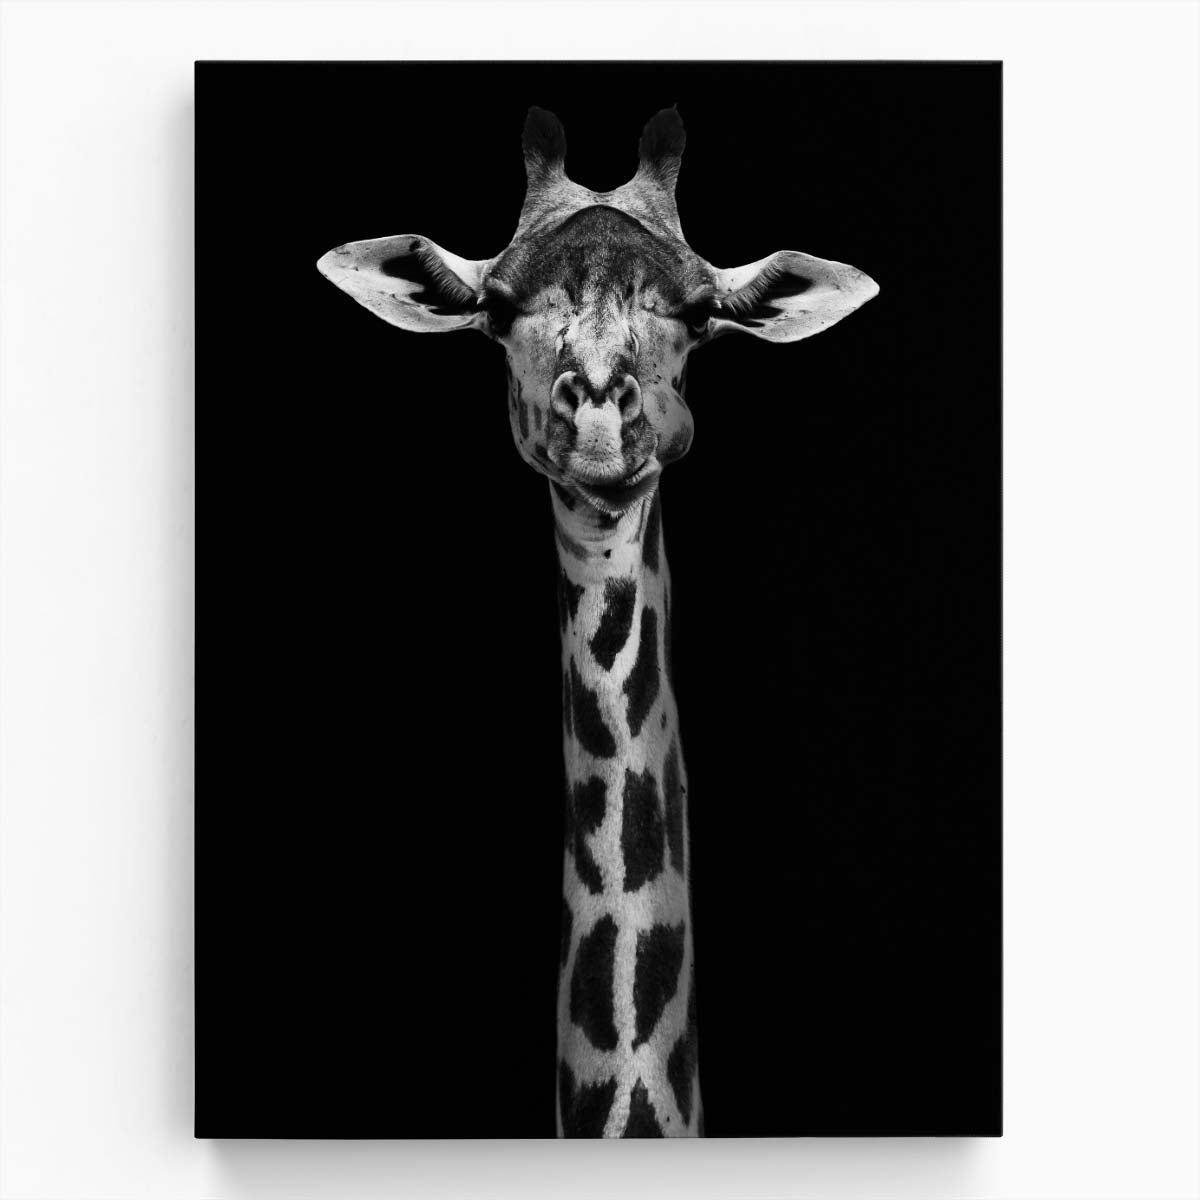 Minimalistic Black and White African Giraffe Portrait Photography by Luxuriance Designs, made in USA